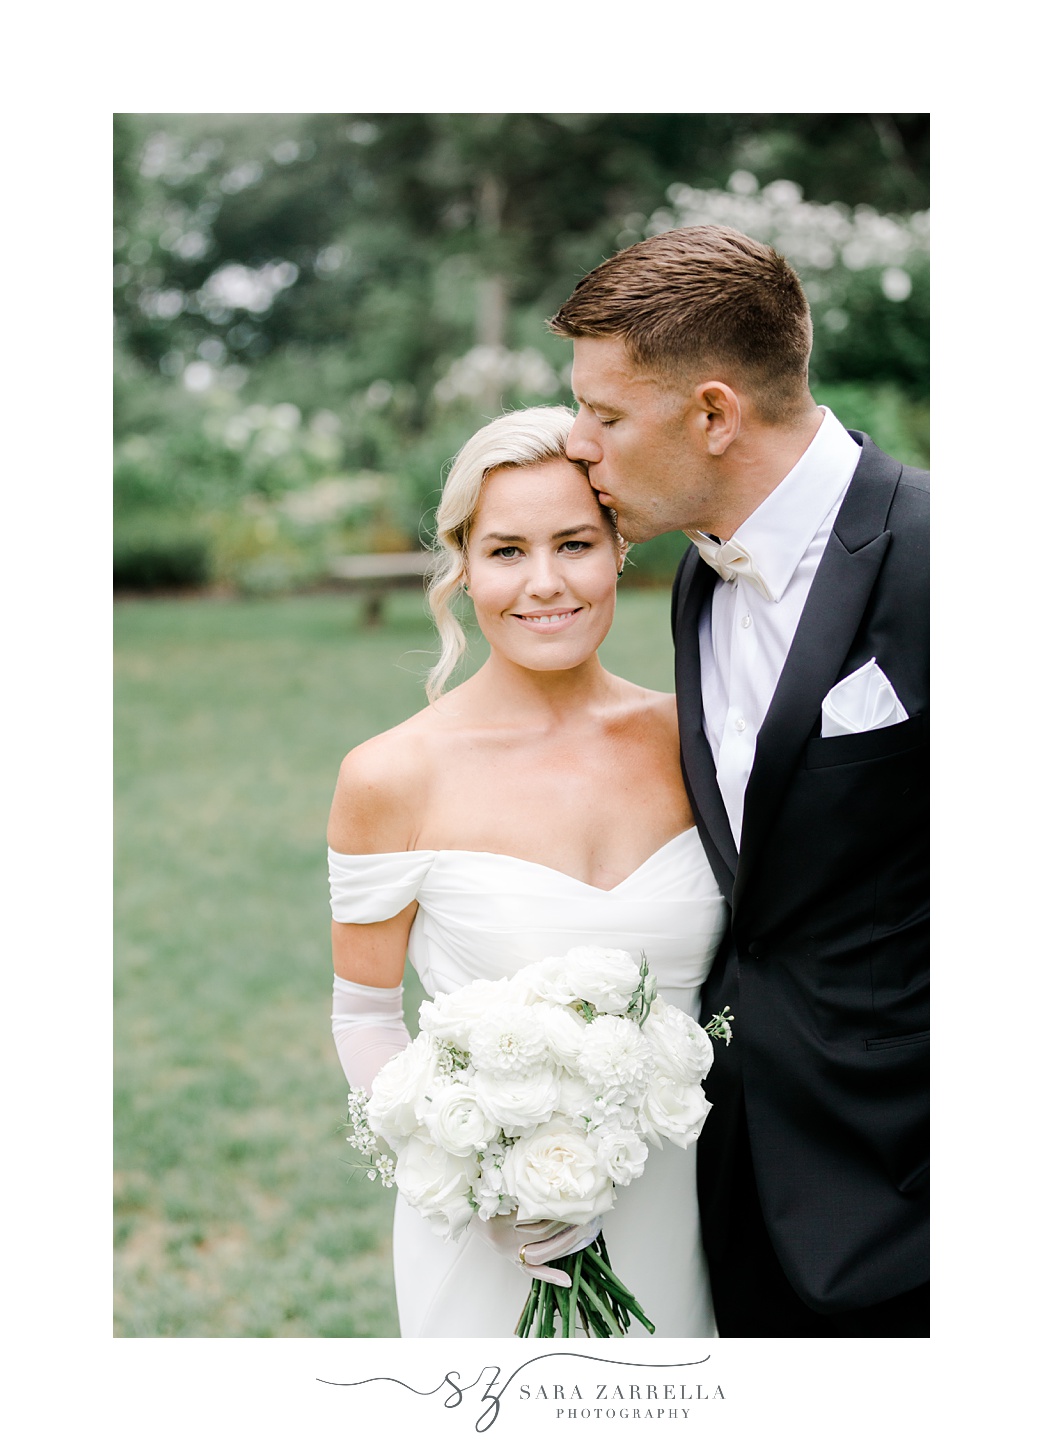 groom leans to kiss bride's forehead in off-the-shoulder gown while holding ivory flowers 